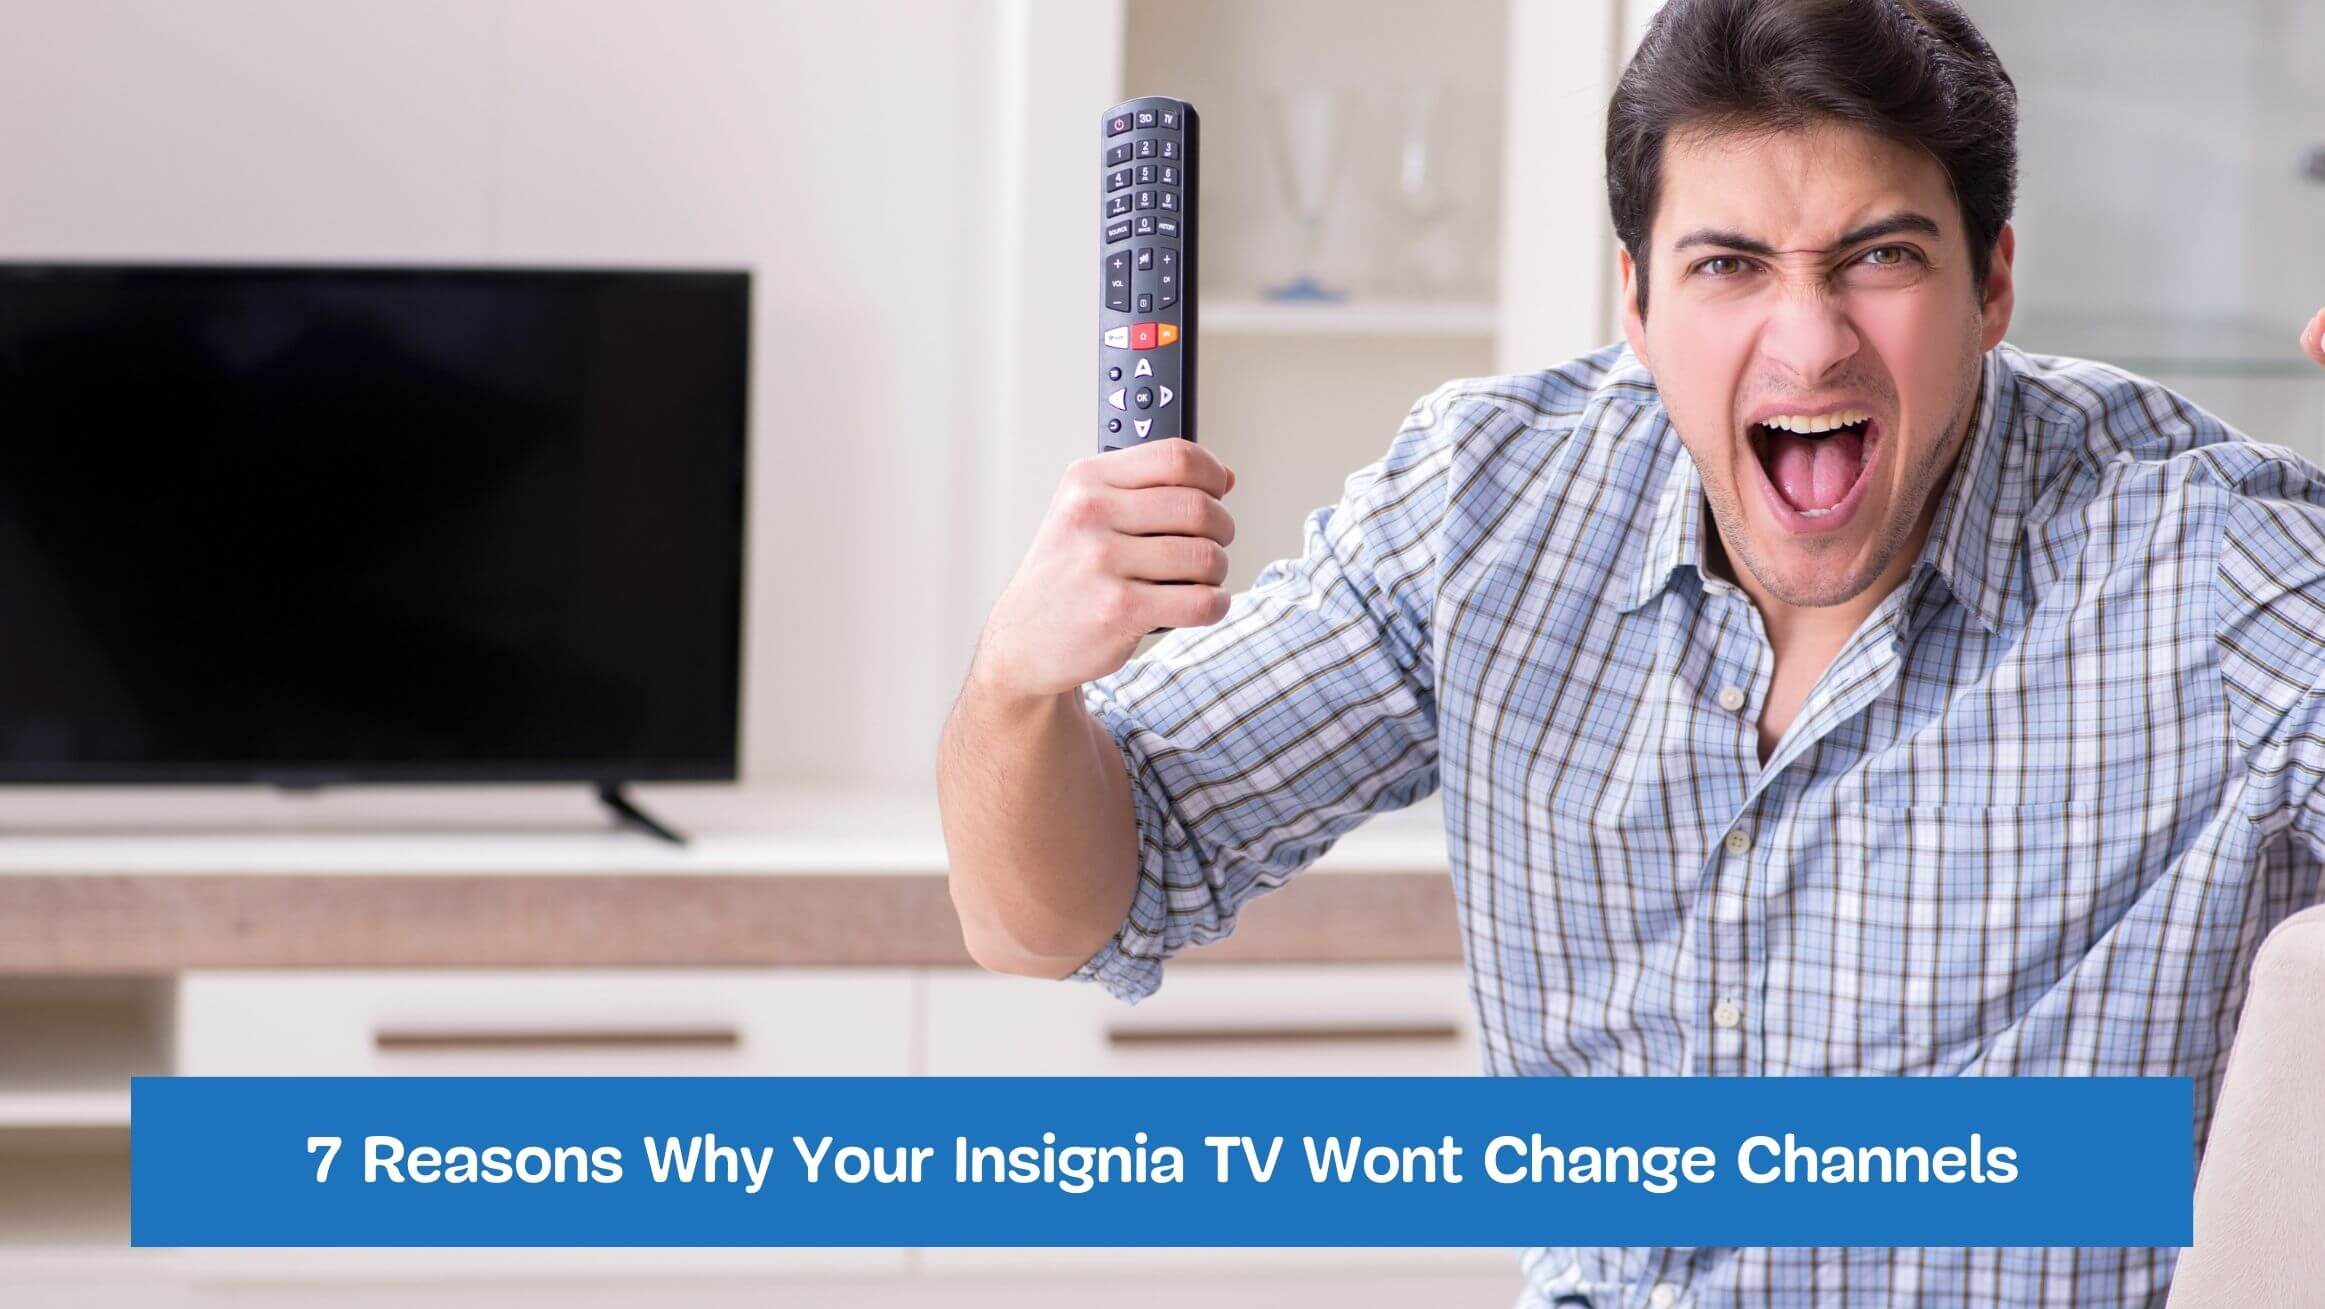 7 Reasons Why Your Insignia TV Wont Change Channels